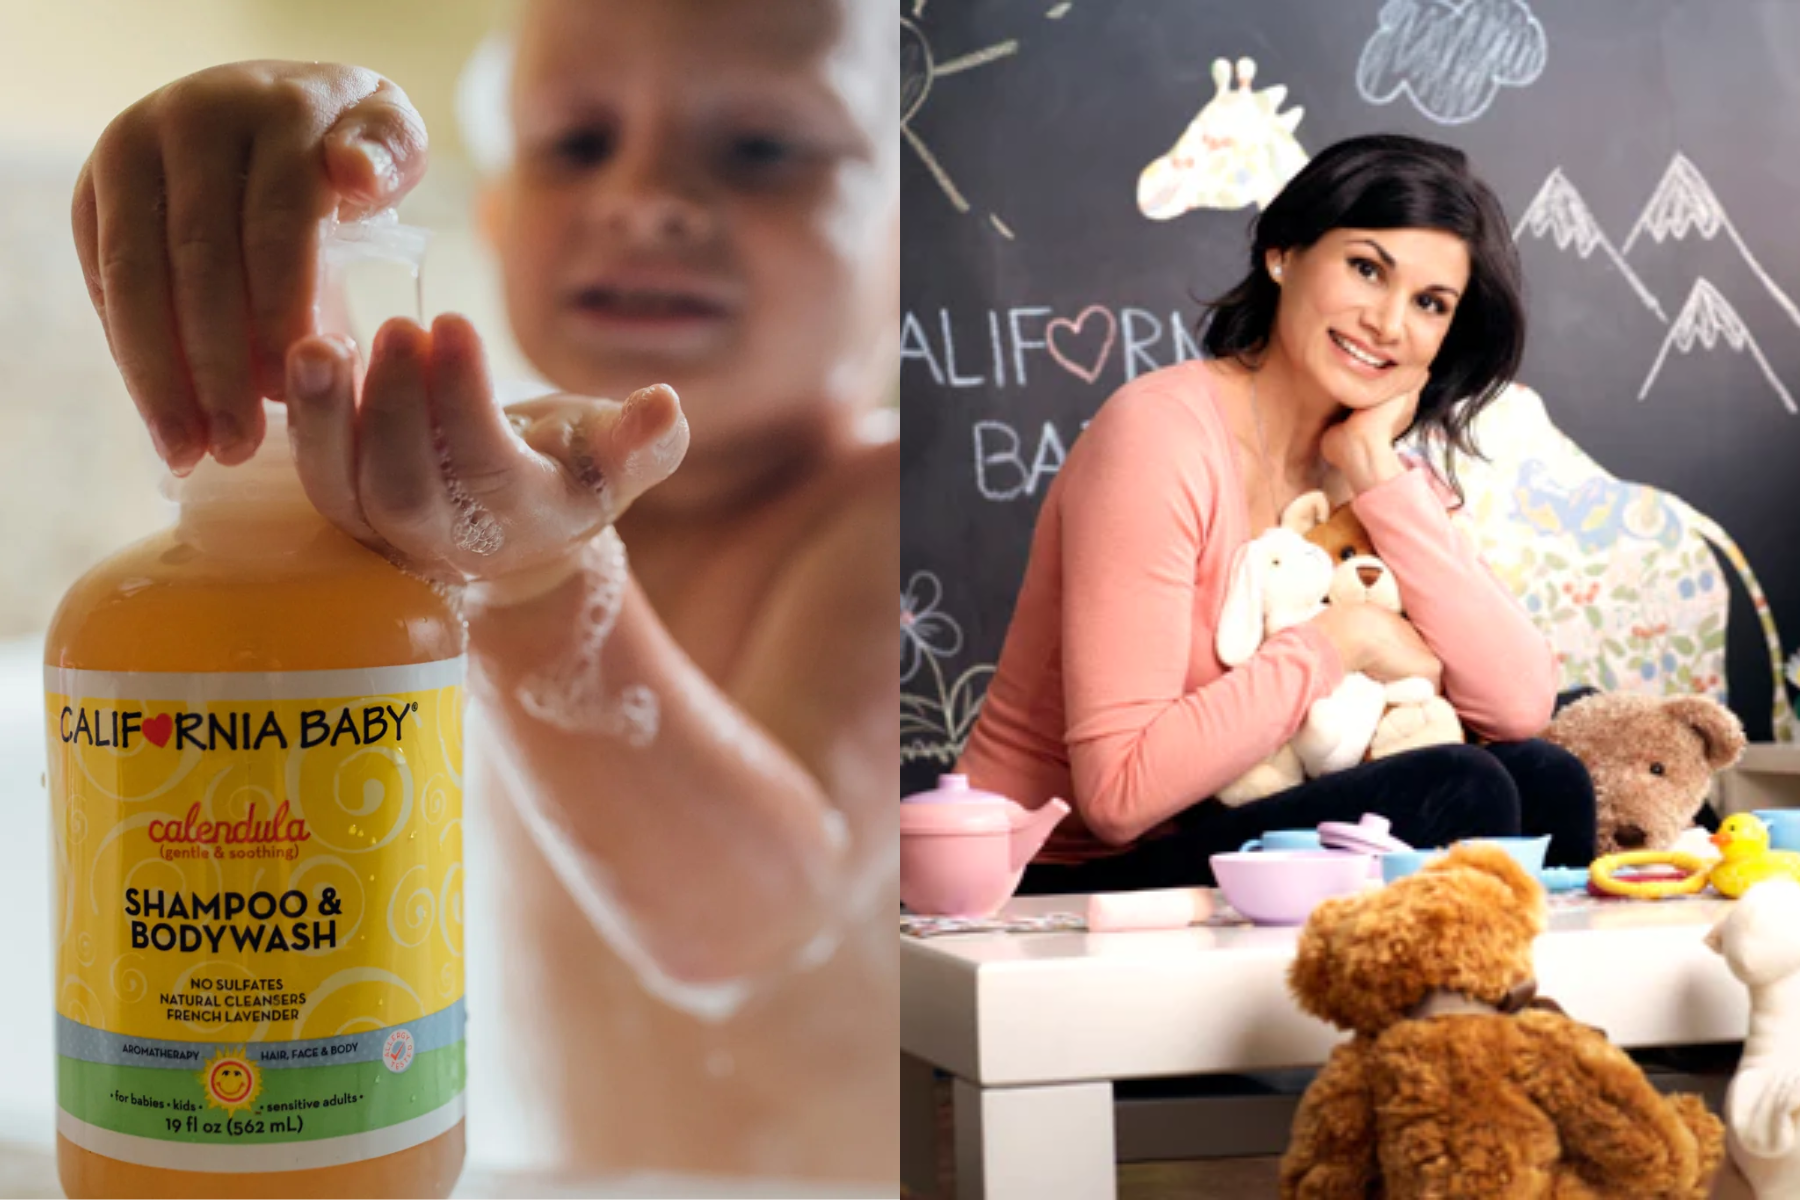 California Baby, founded by Jessica Iclisoy, offers organic skincare products for babies, prioritizing natural ingredients and sustainable practices. One of Victoria’s favorite baby and children’s care brands since her little ones were just born. Gentle, clean, sustainable - just the way we like it.